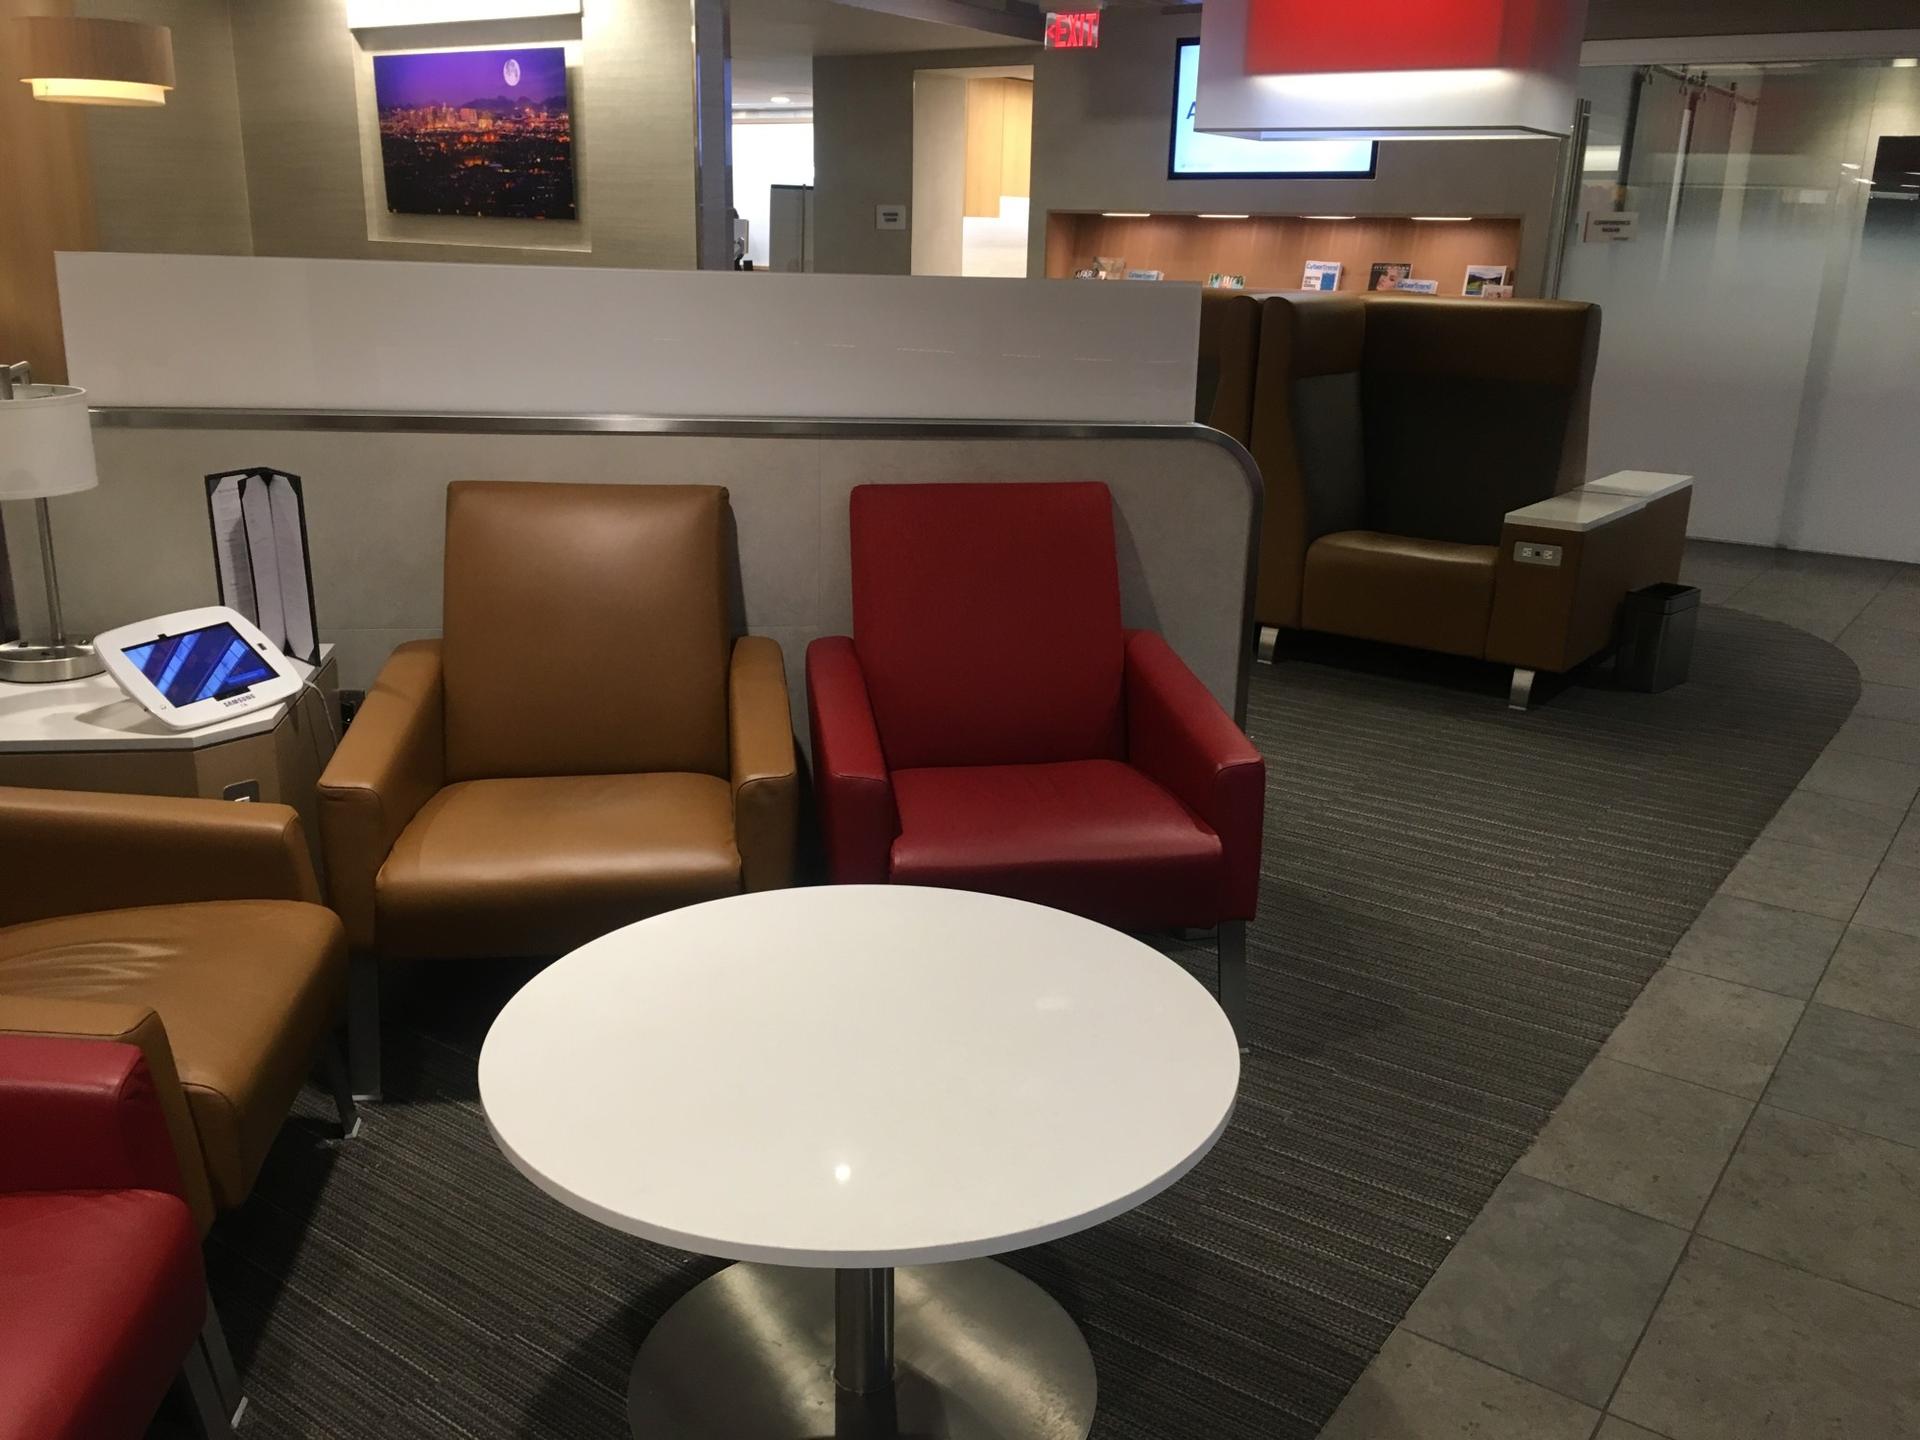 American Airlines Admirals Club (Gate A7) image 16 of 25